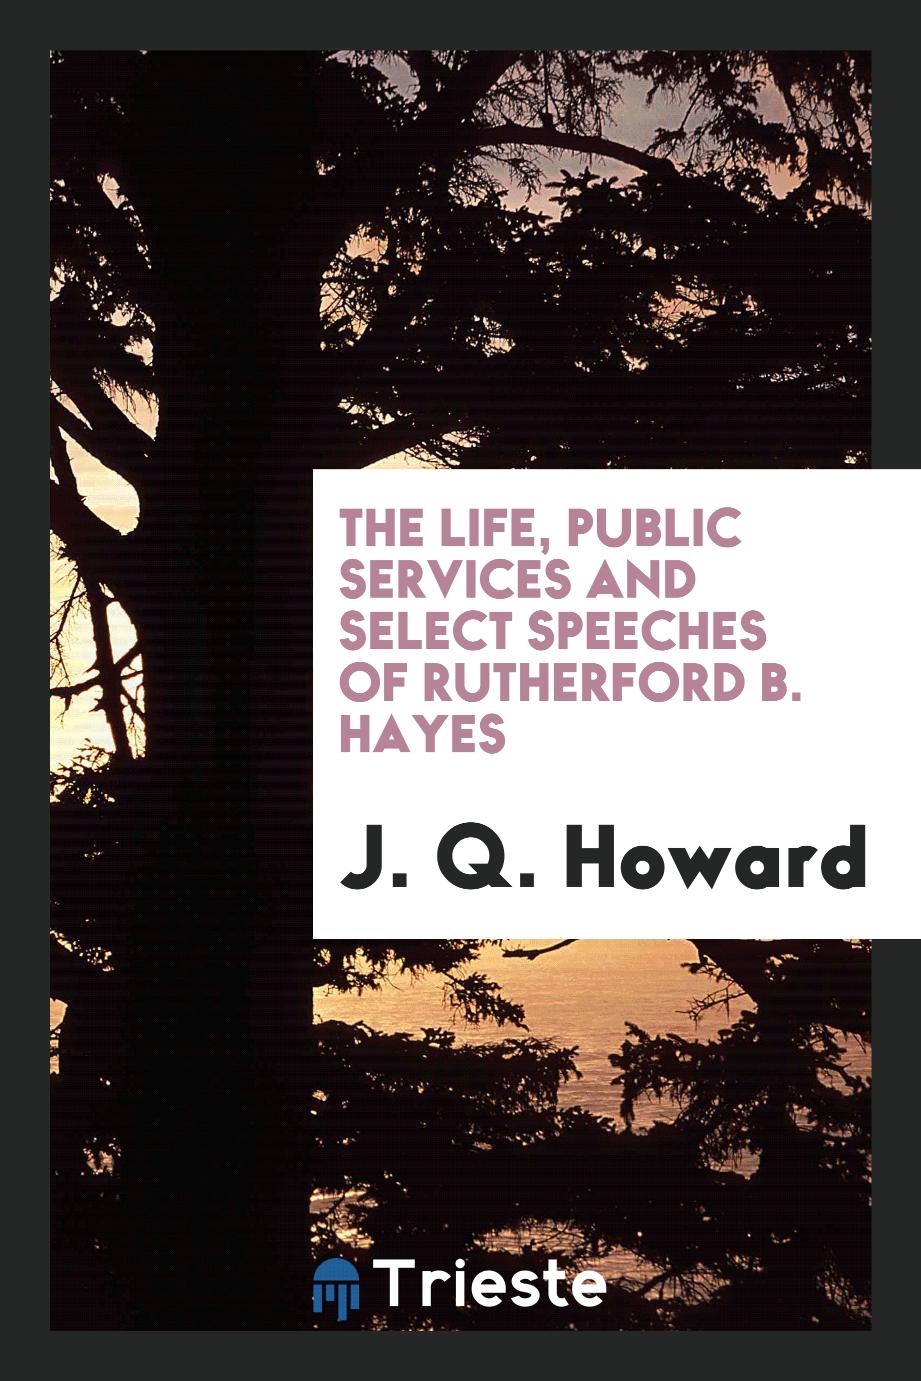 The life, public services and select speeches of Rutherford B. Hayes